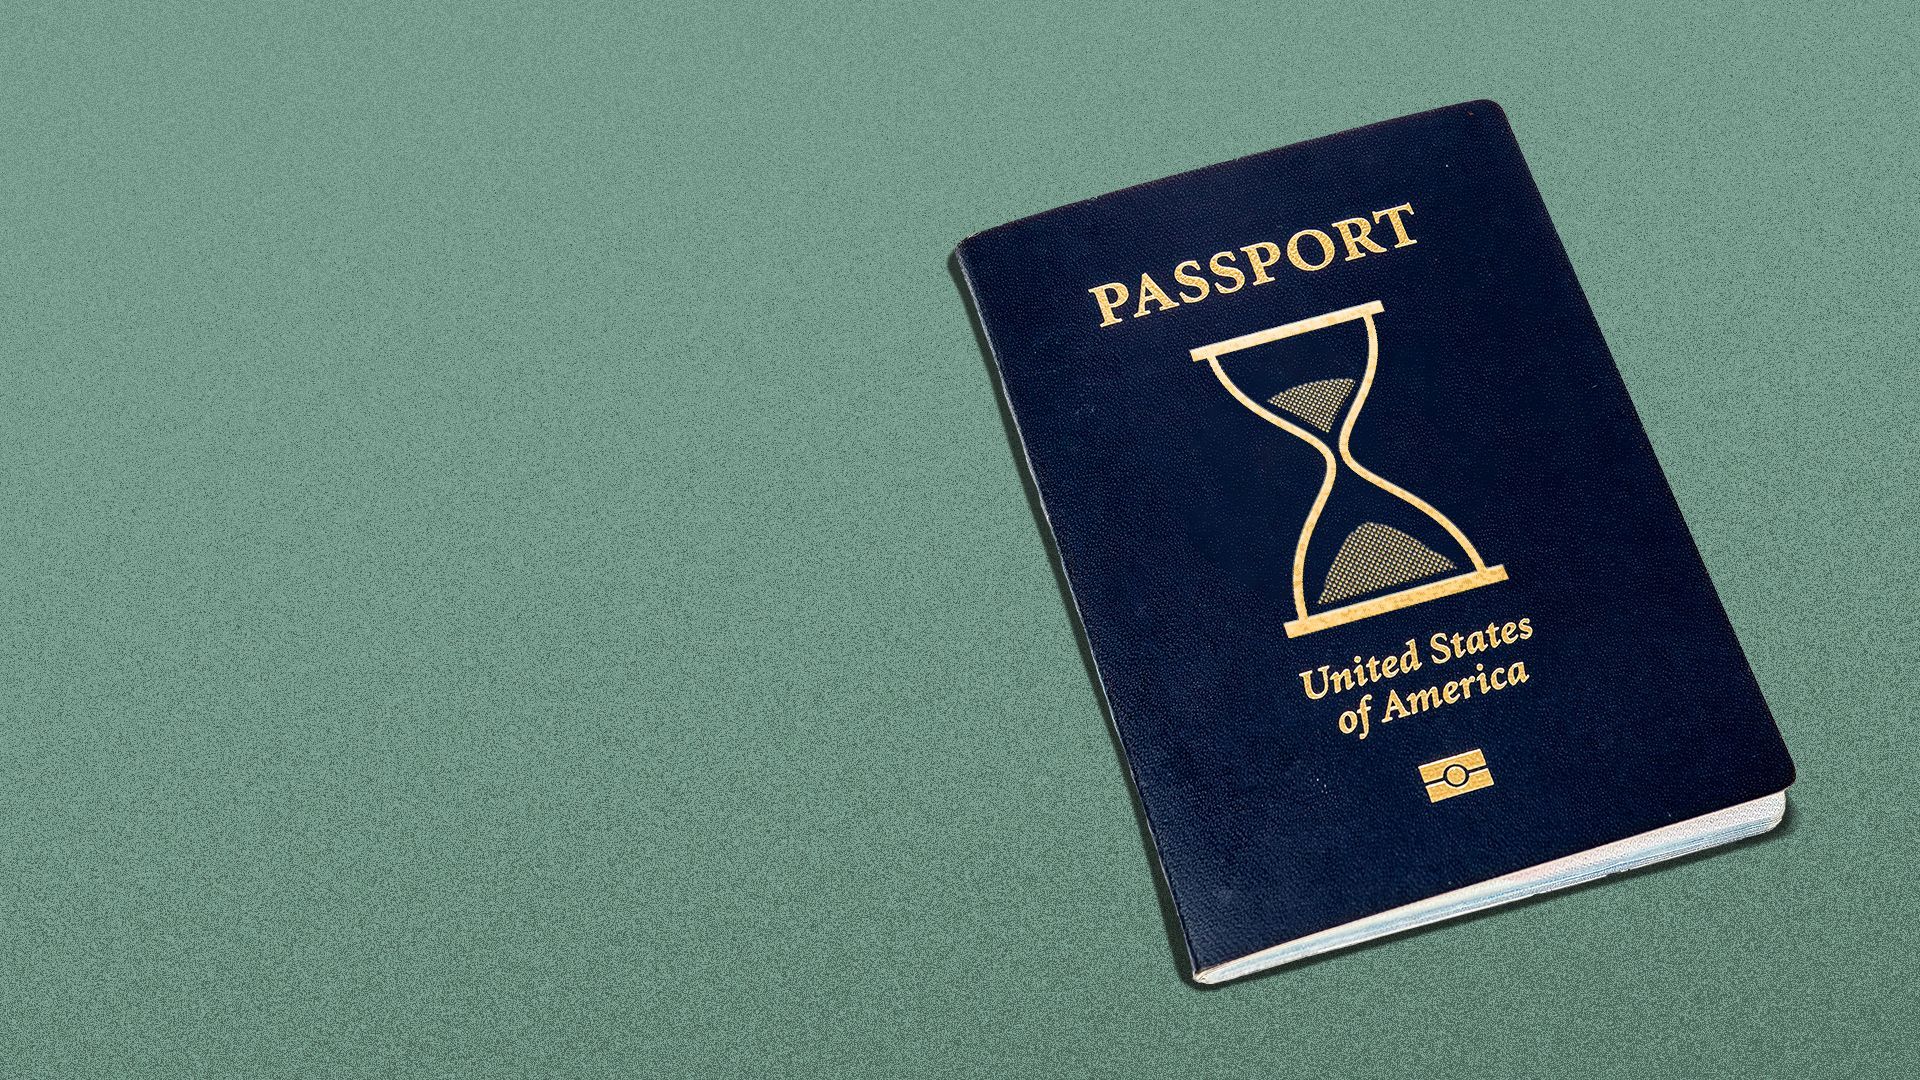 Illustration of a passport with an hourglass on the cover.